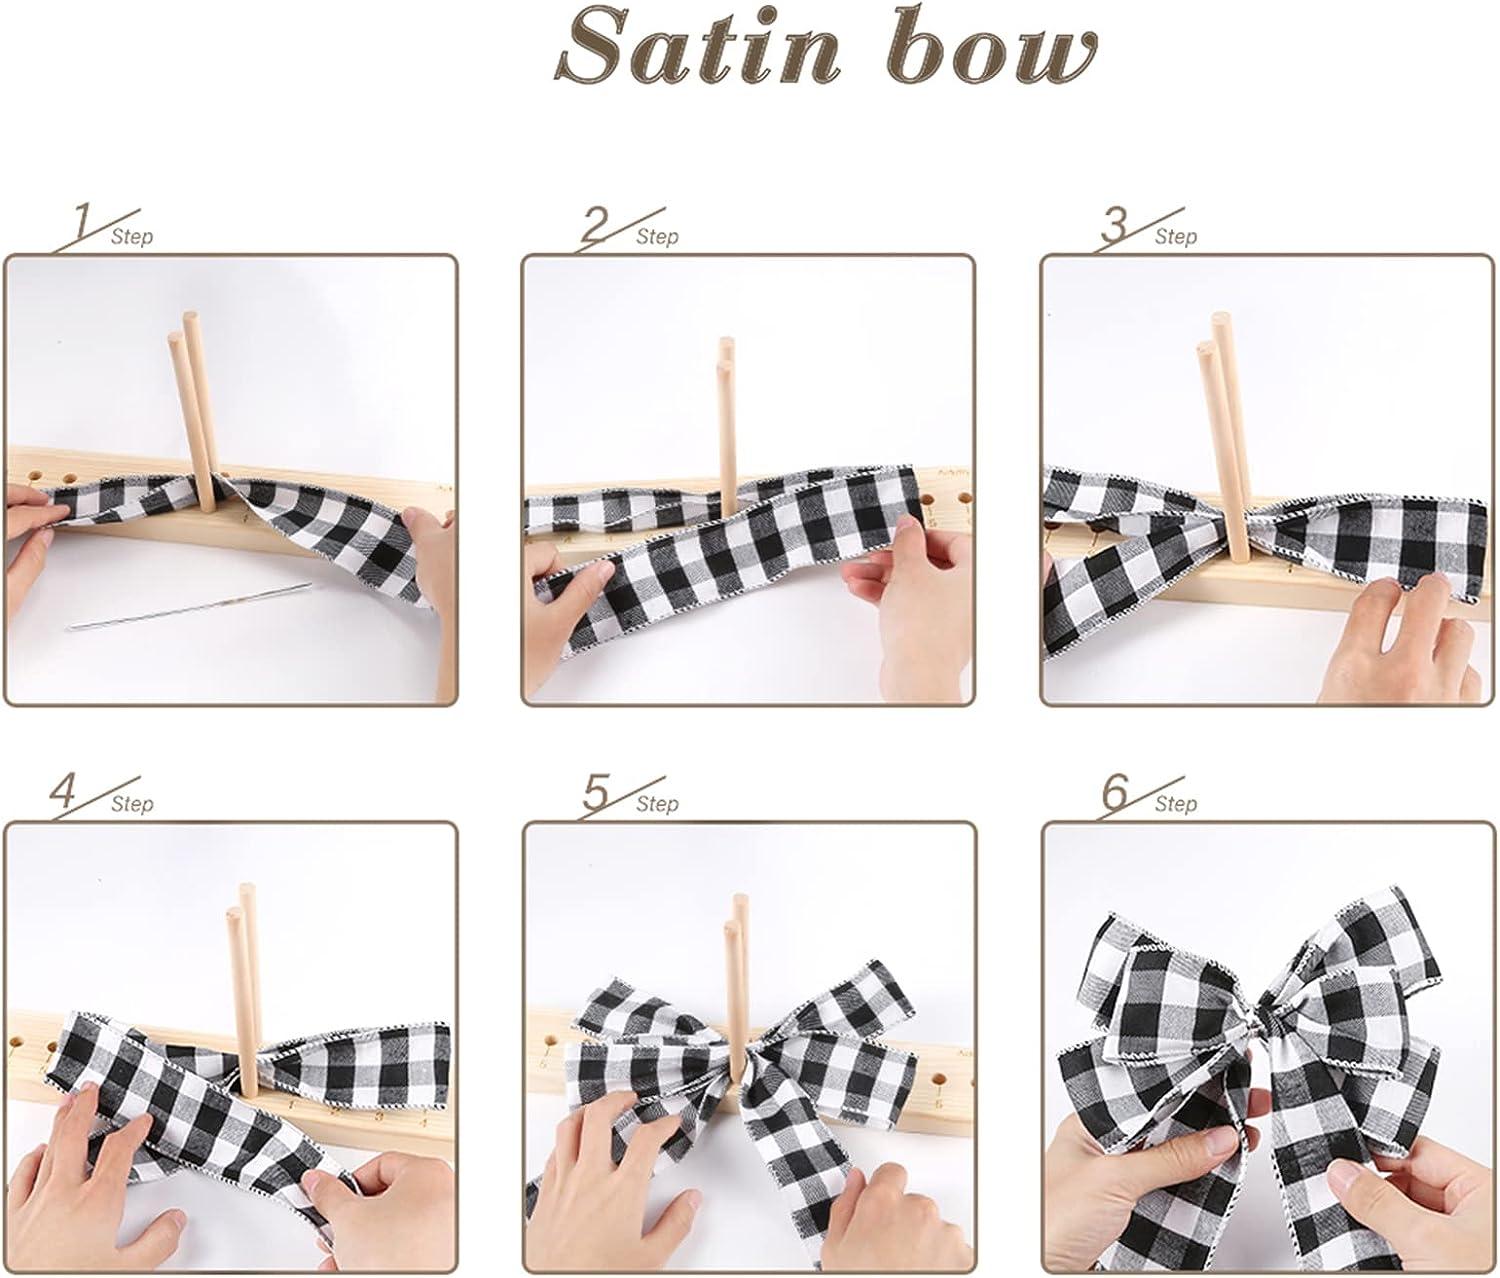 Bow Maker for Ribbon, Nice Bow Making Tool, DIY Wreath Bow Maker Tool for  Creating Gift Bows, Various Crafts, Party Decorations, Hair Bows, Corsages,  Holiday Wreaths : : Home